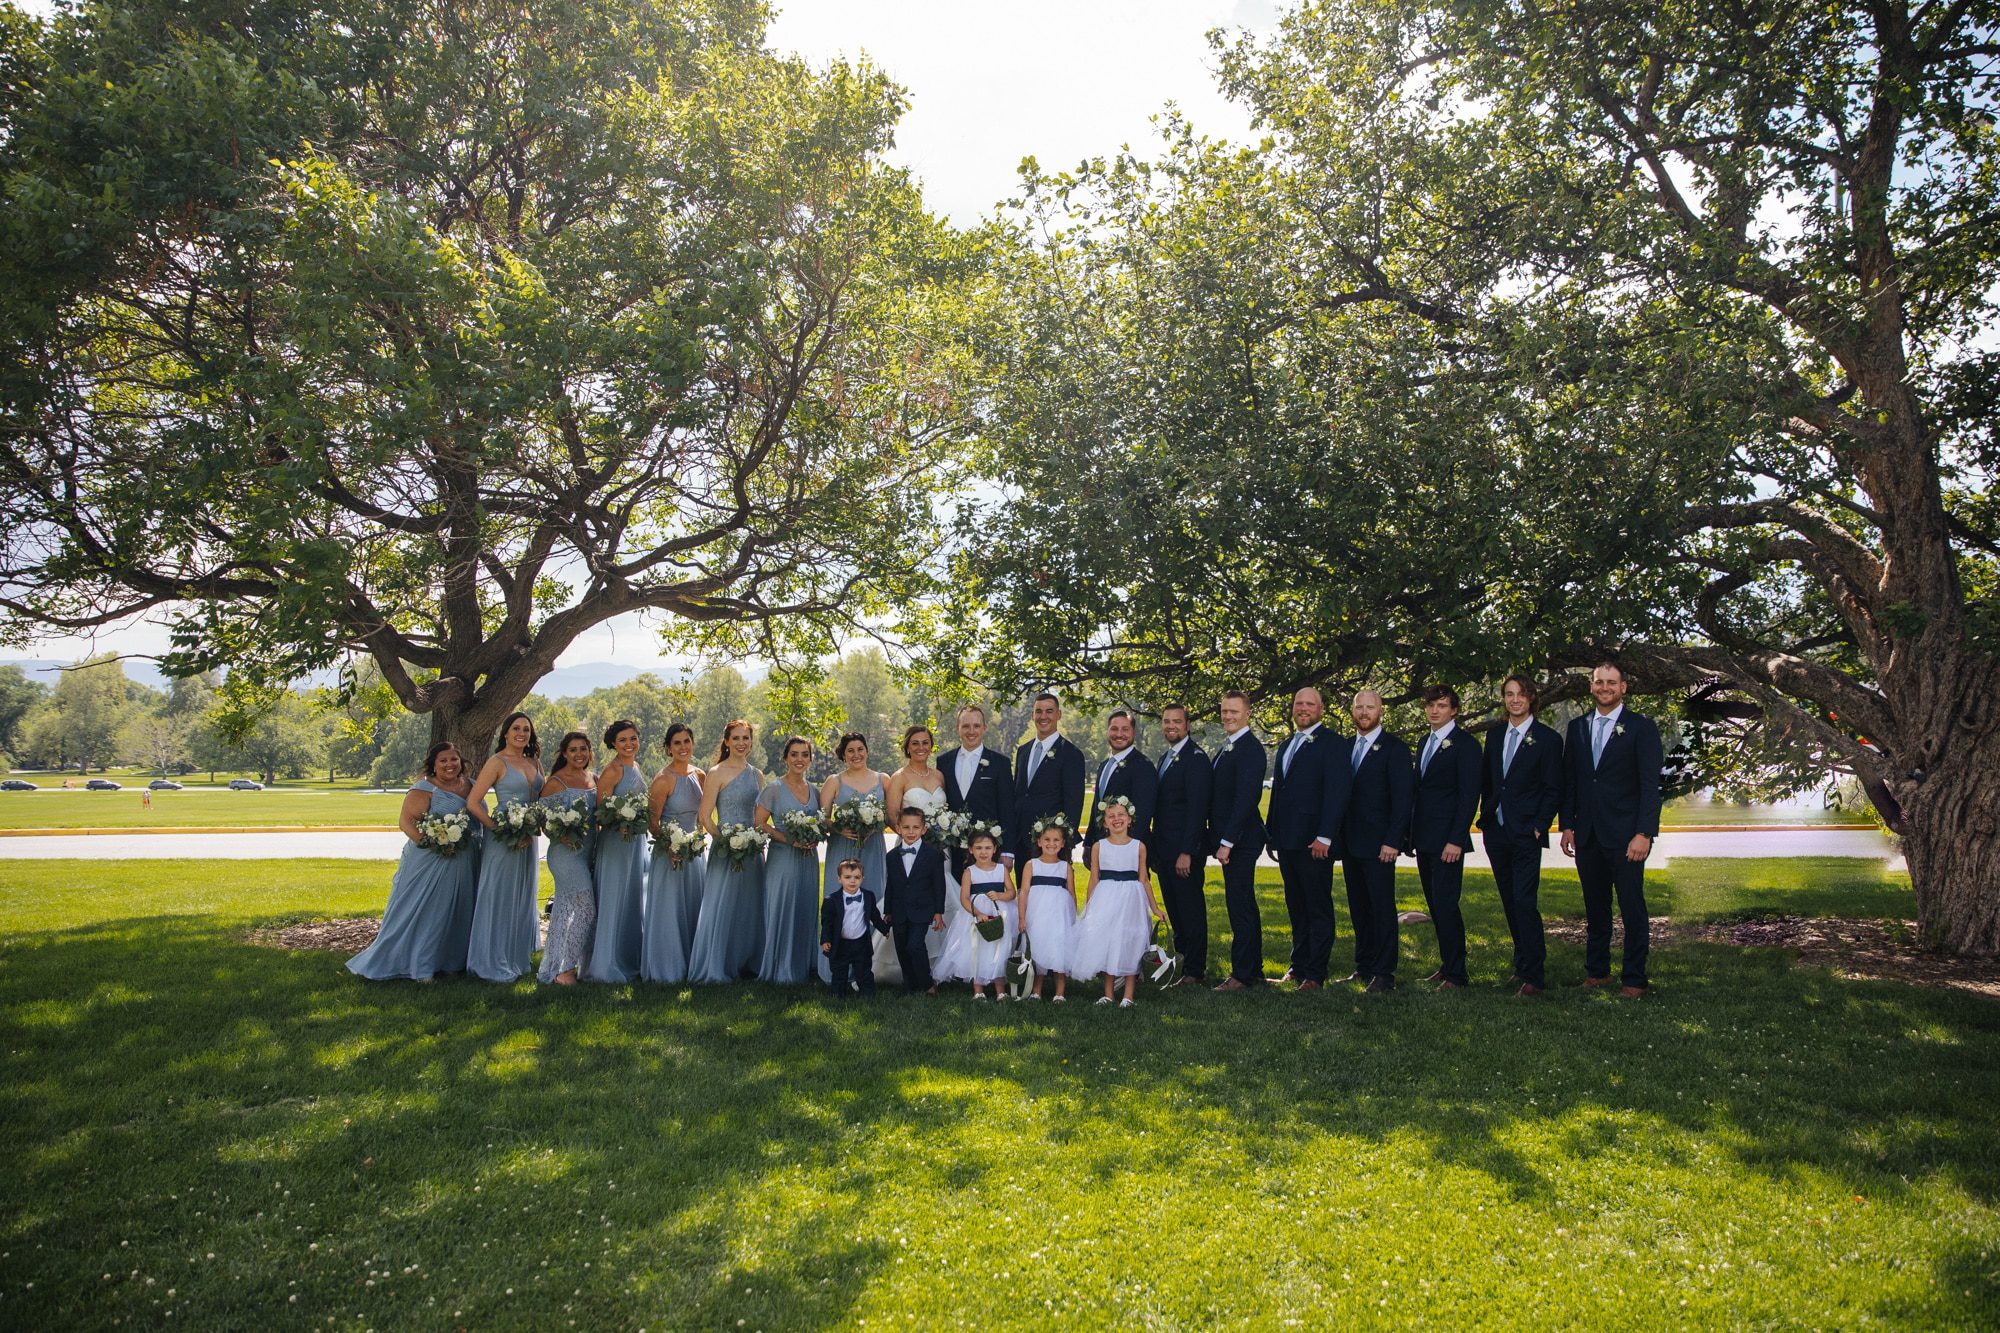 wedding party, wedding party photos, groomsmen and bridesmaids, bride and groom with wedding party, formal wedding photos, outdoor wedding photos, Cheeseman Park wedding, Cheeseman Park denver, light blue bridesmaid dresses, blue suits groomsmen, denver wedding photographer, best wedding photographers in denver